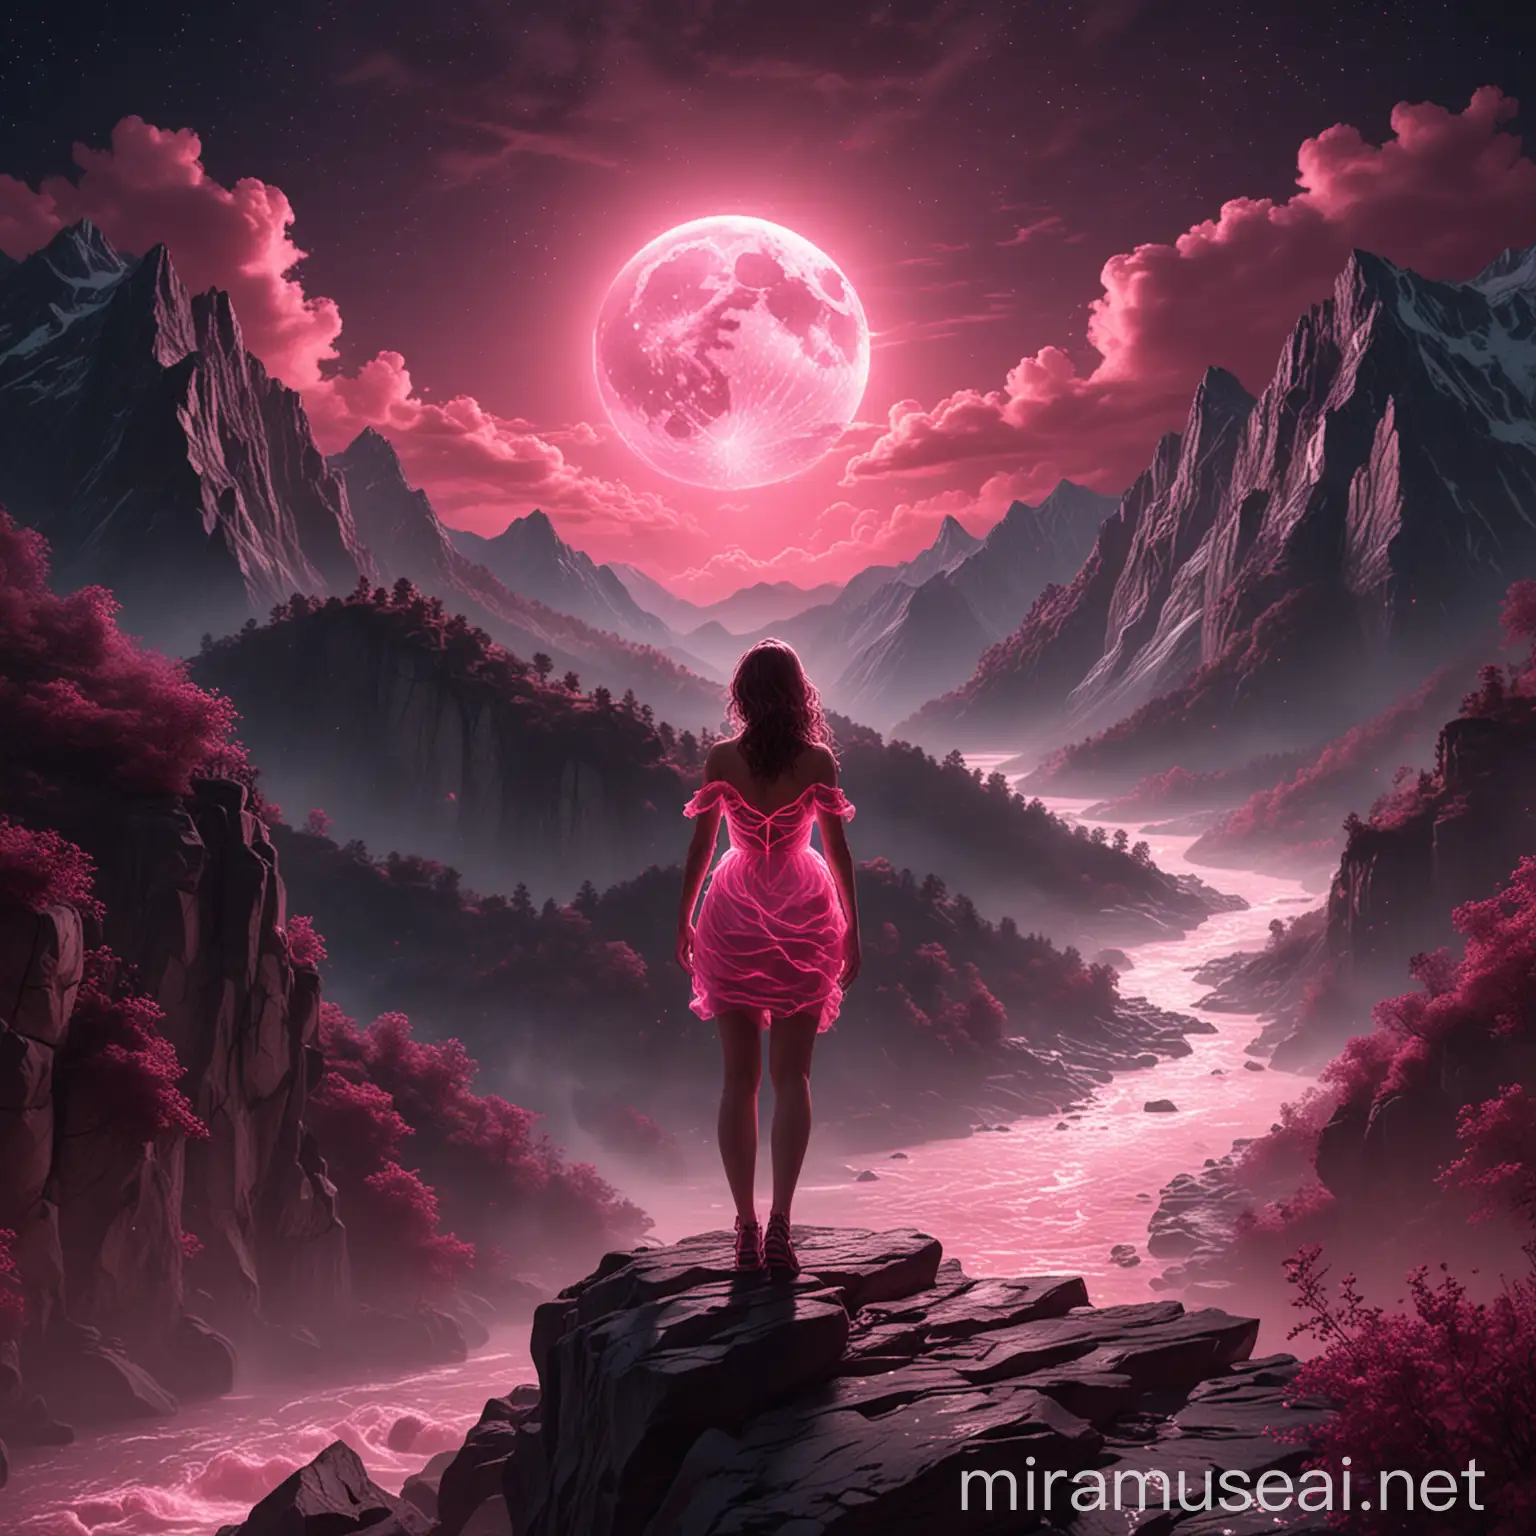 Woman in Neon Pink Dress Standing on Mountain Top Overlooking River at Midnight